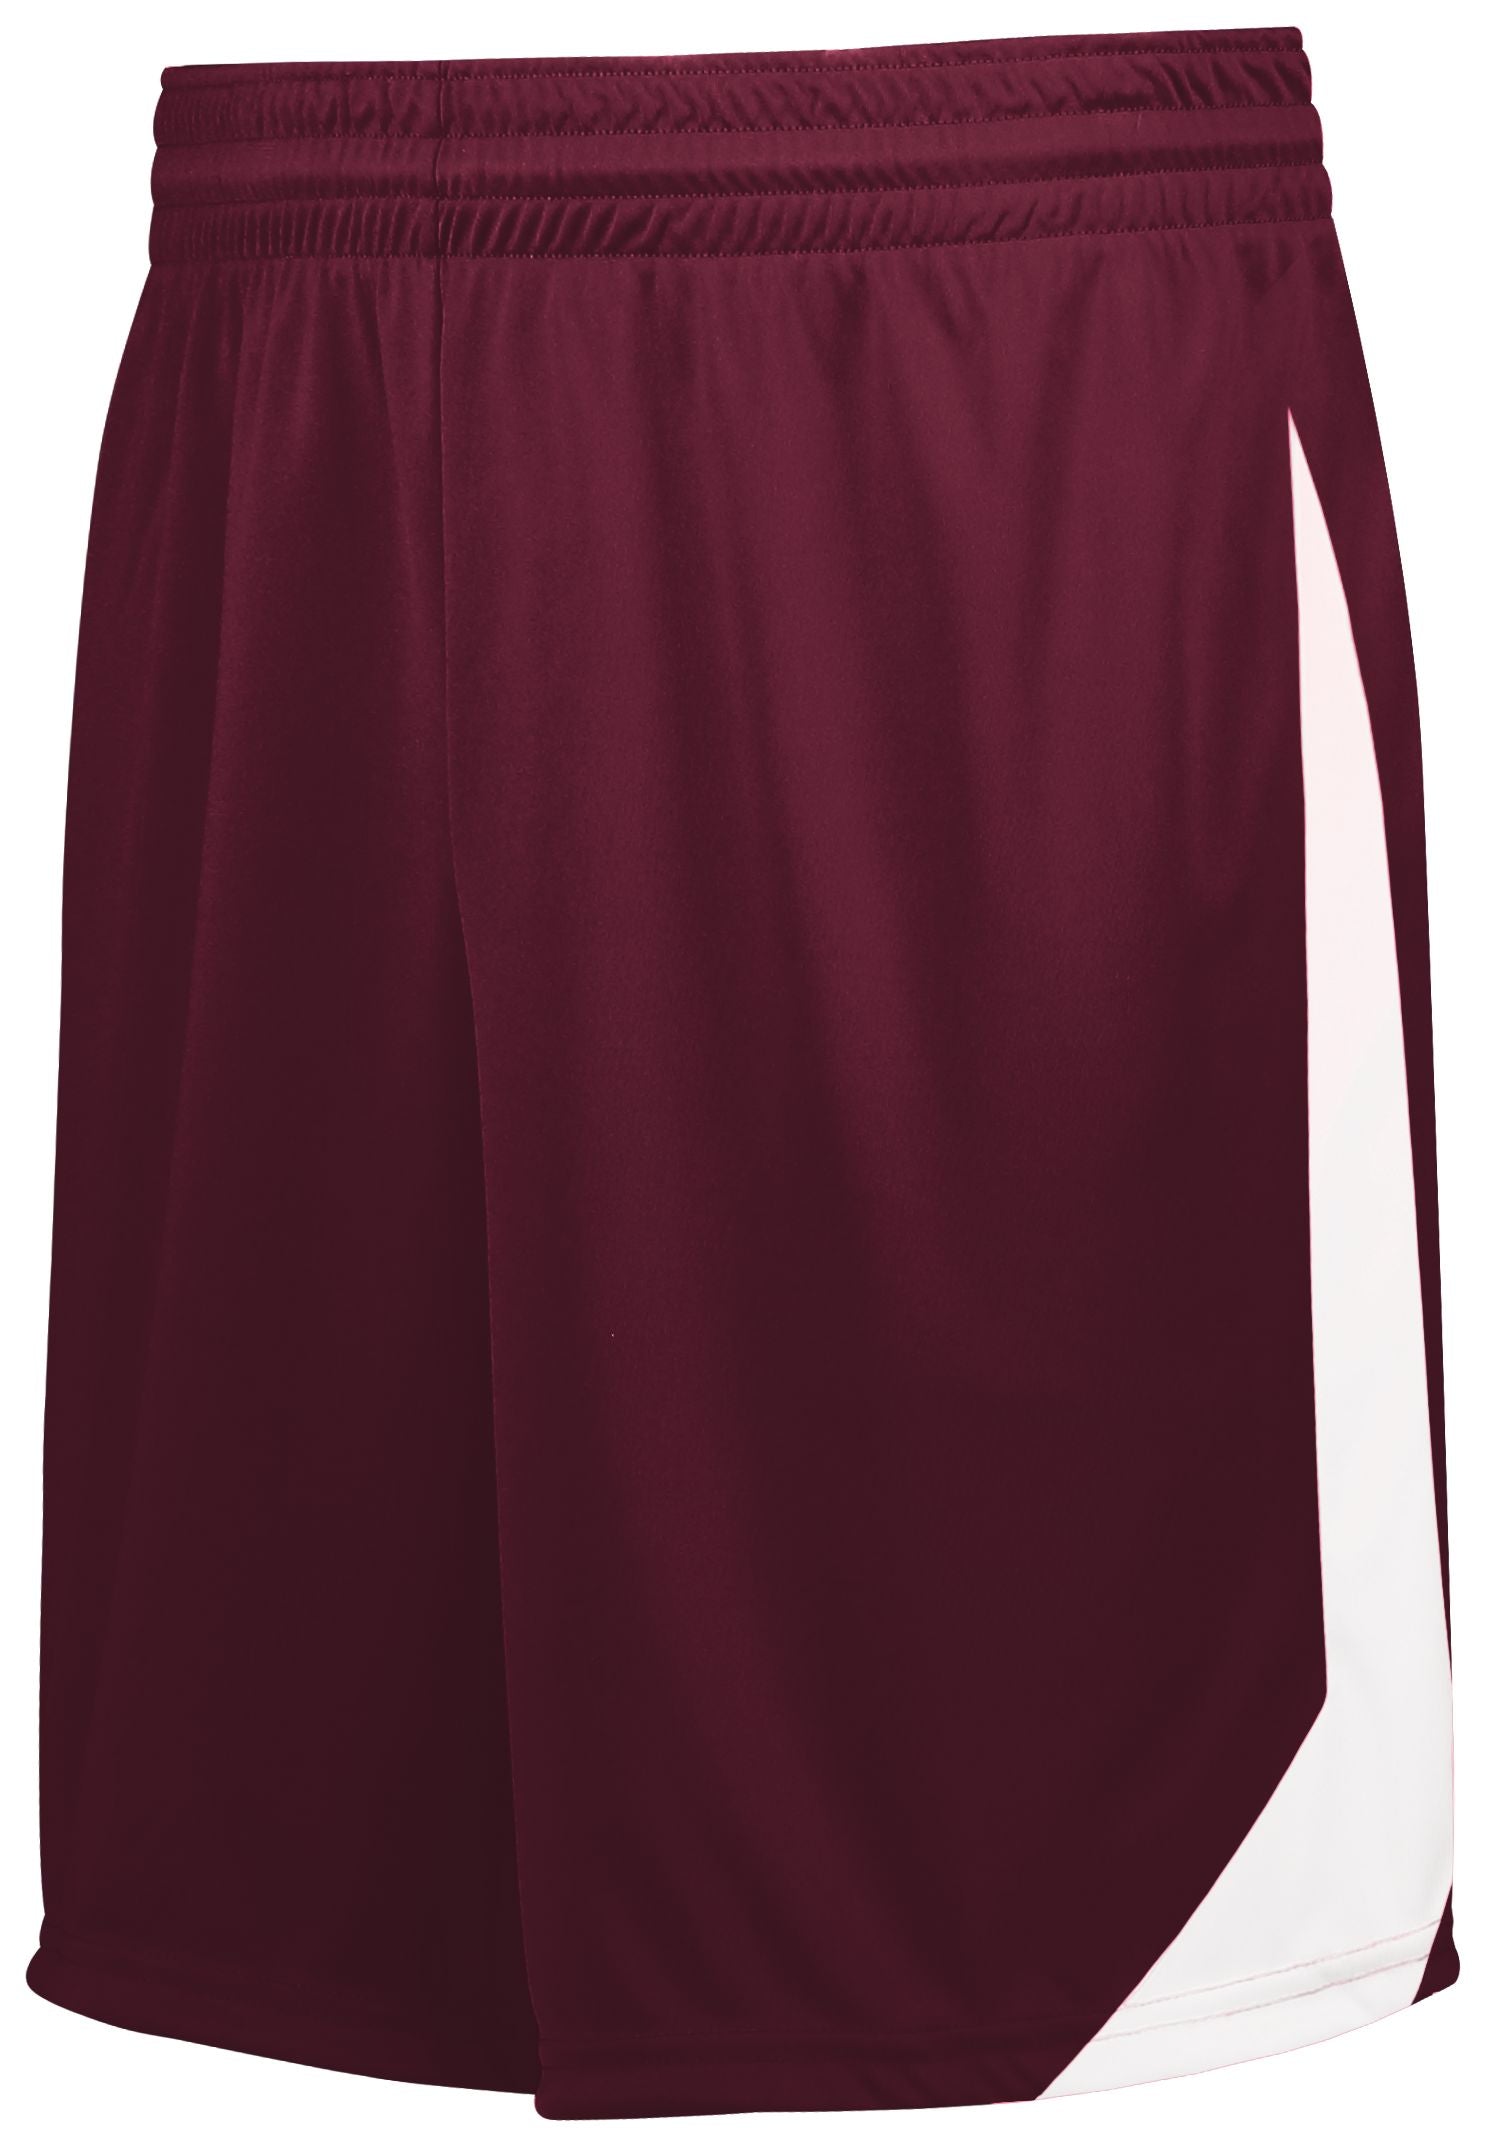 High 5 Athletico Shorts in Maroon/White  -Part of the Adult, Adult-Shorts, High5-Products, Soccer, All-Sports-1 product lines at KanaleyCreations.com